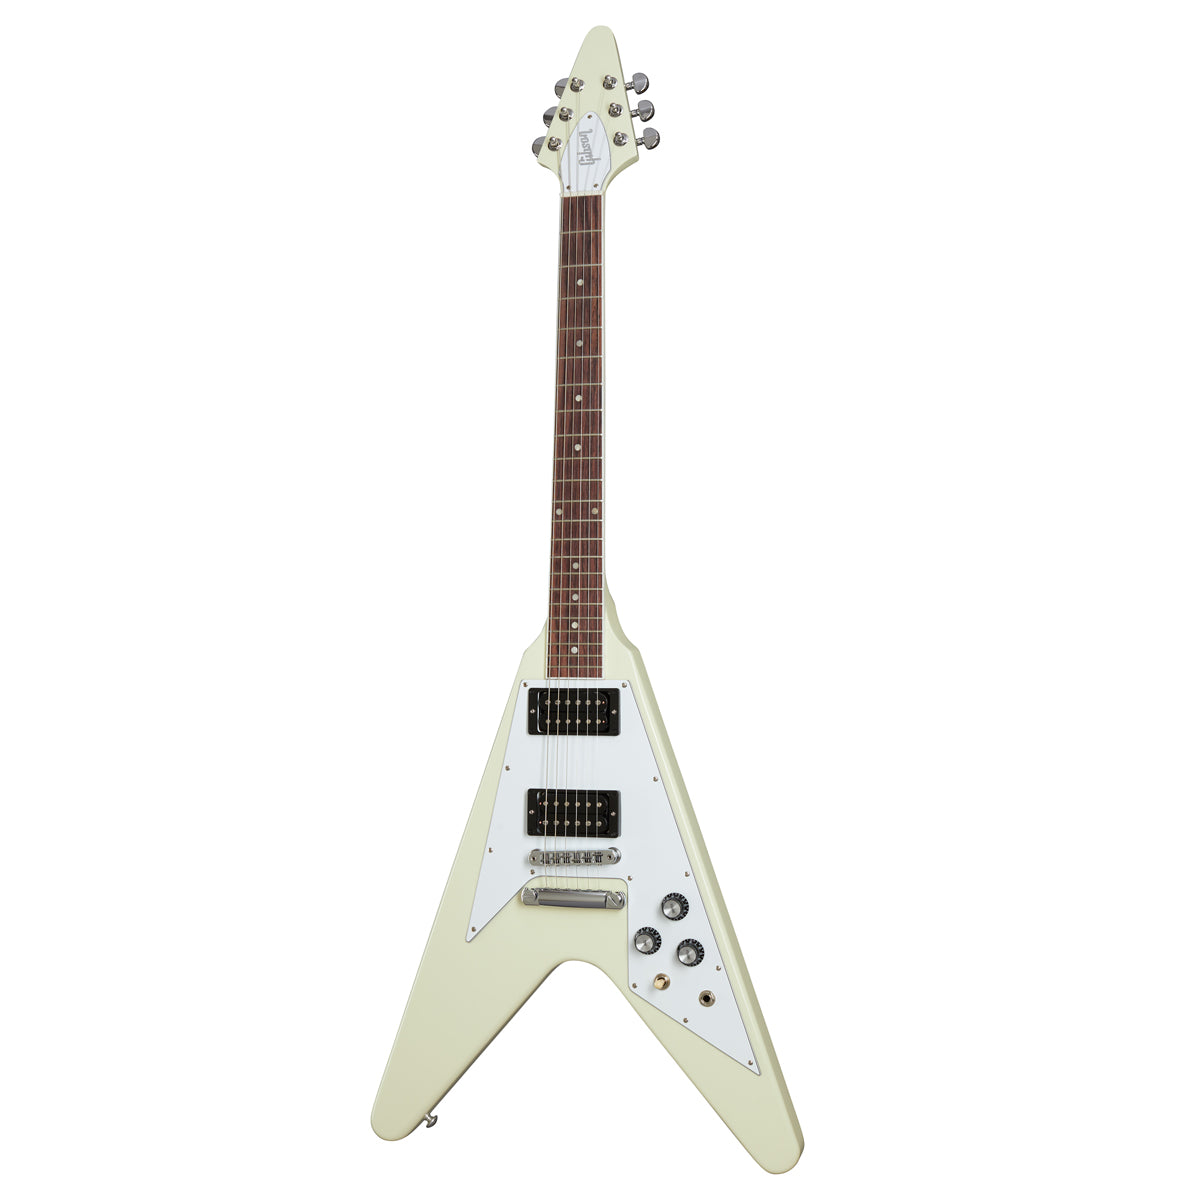 Gibson 70s Flying V Electric Guitar White - DSVS00CWCH1